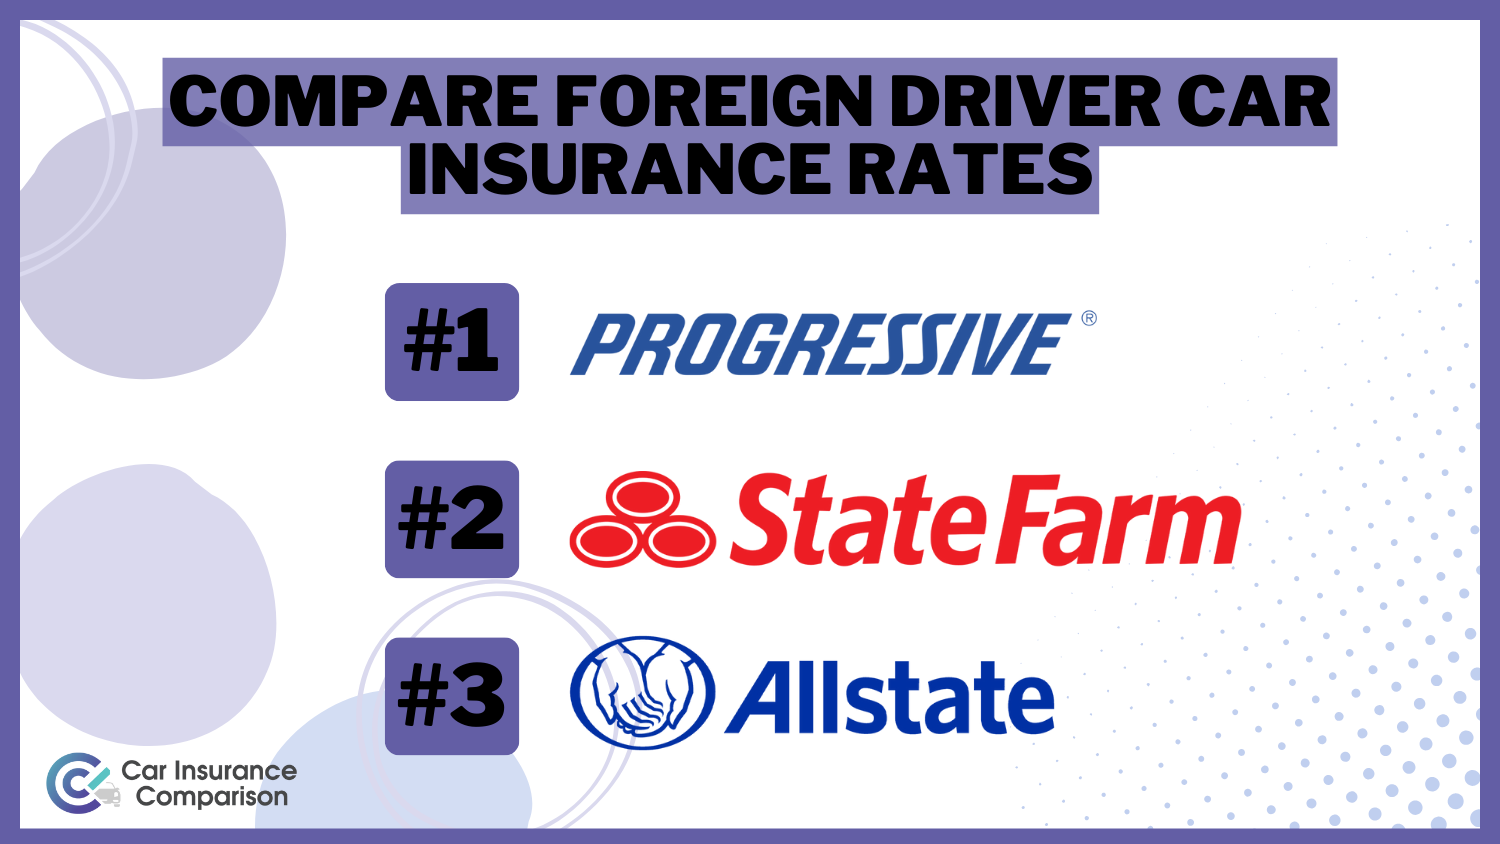 Progressive, State Farm and Allstate: Best Car Insurance for Foreigners  